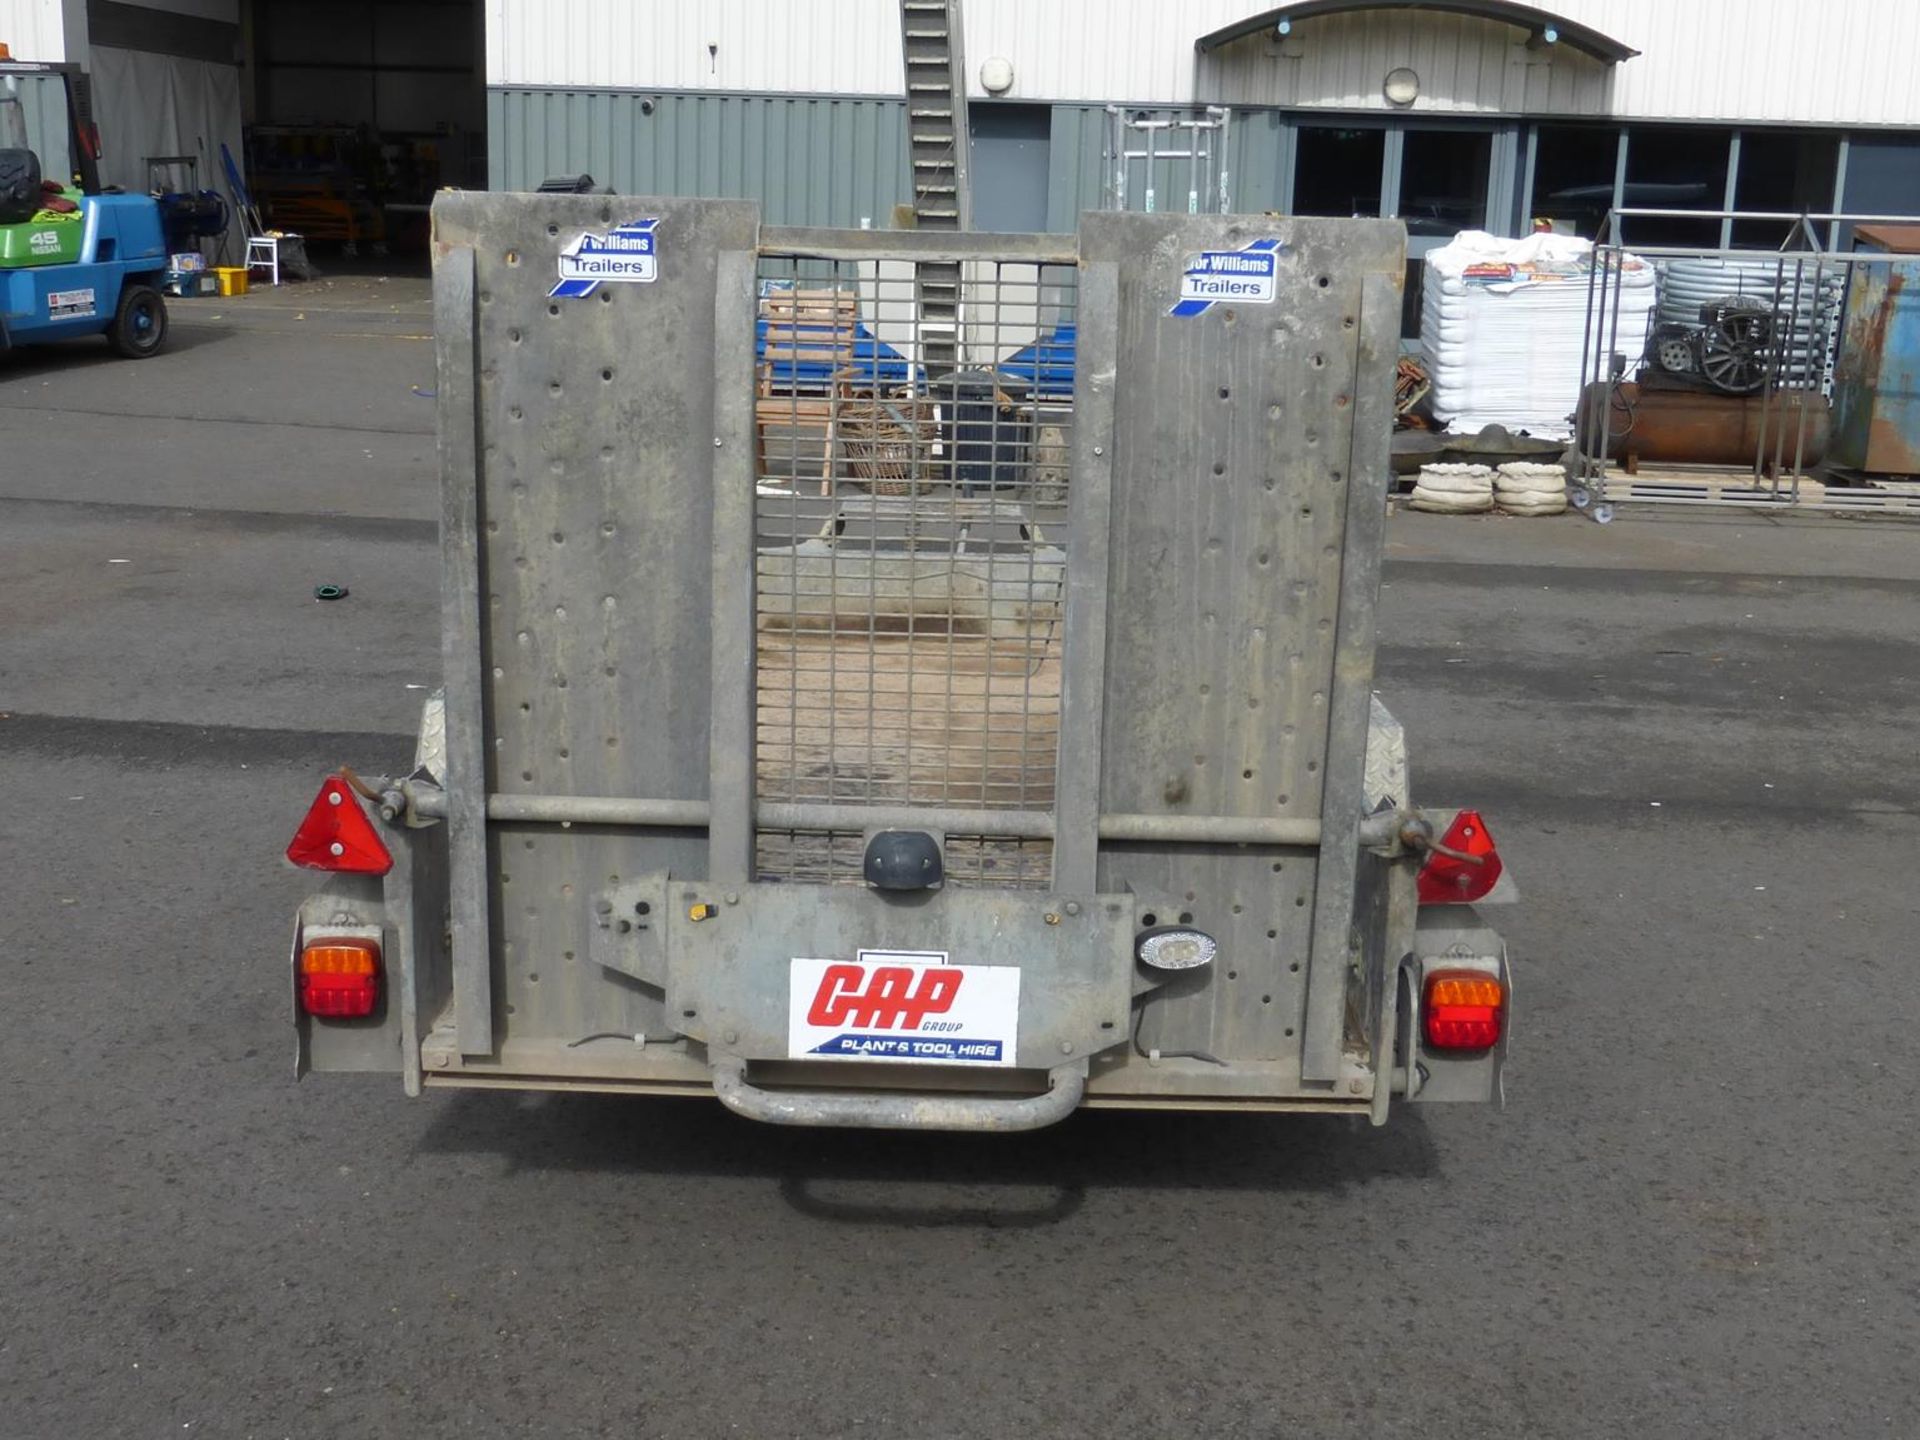 Ifor Williams 2013 Type DB56 GH94 Galvanised Twin Axle Plant Trailer. Vin No: SCK600000C0619020, - Image 4 of 10